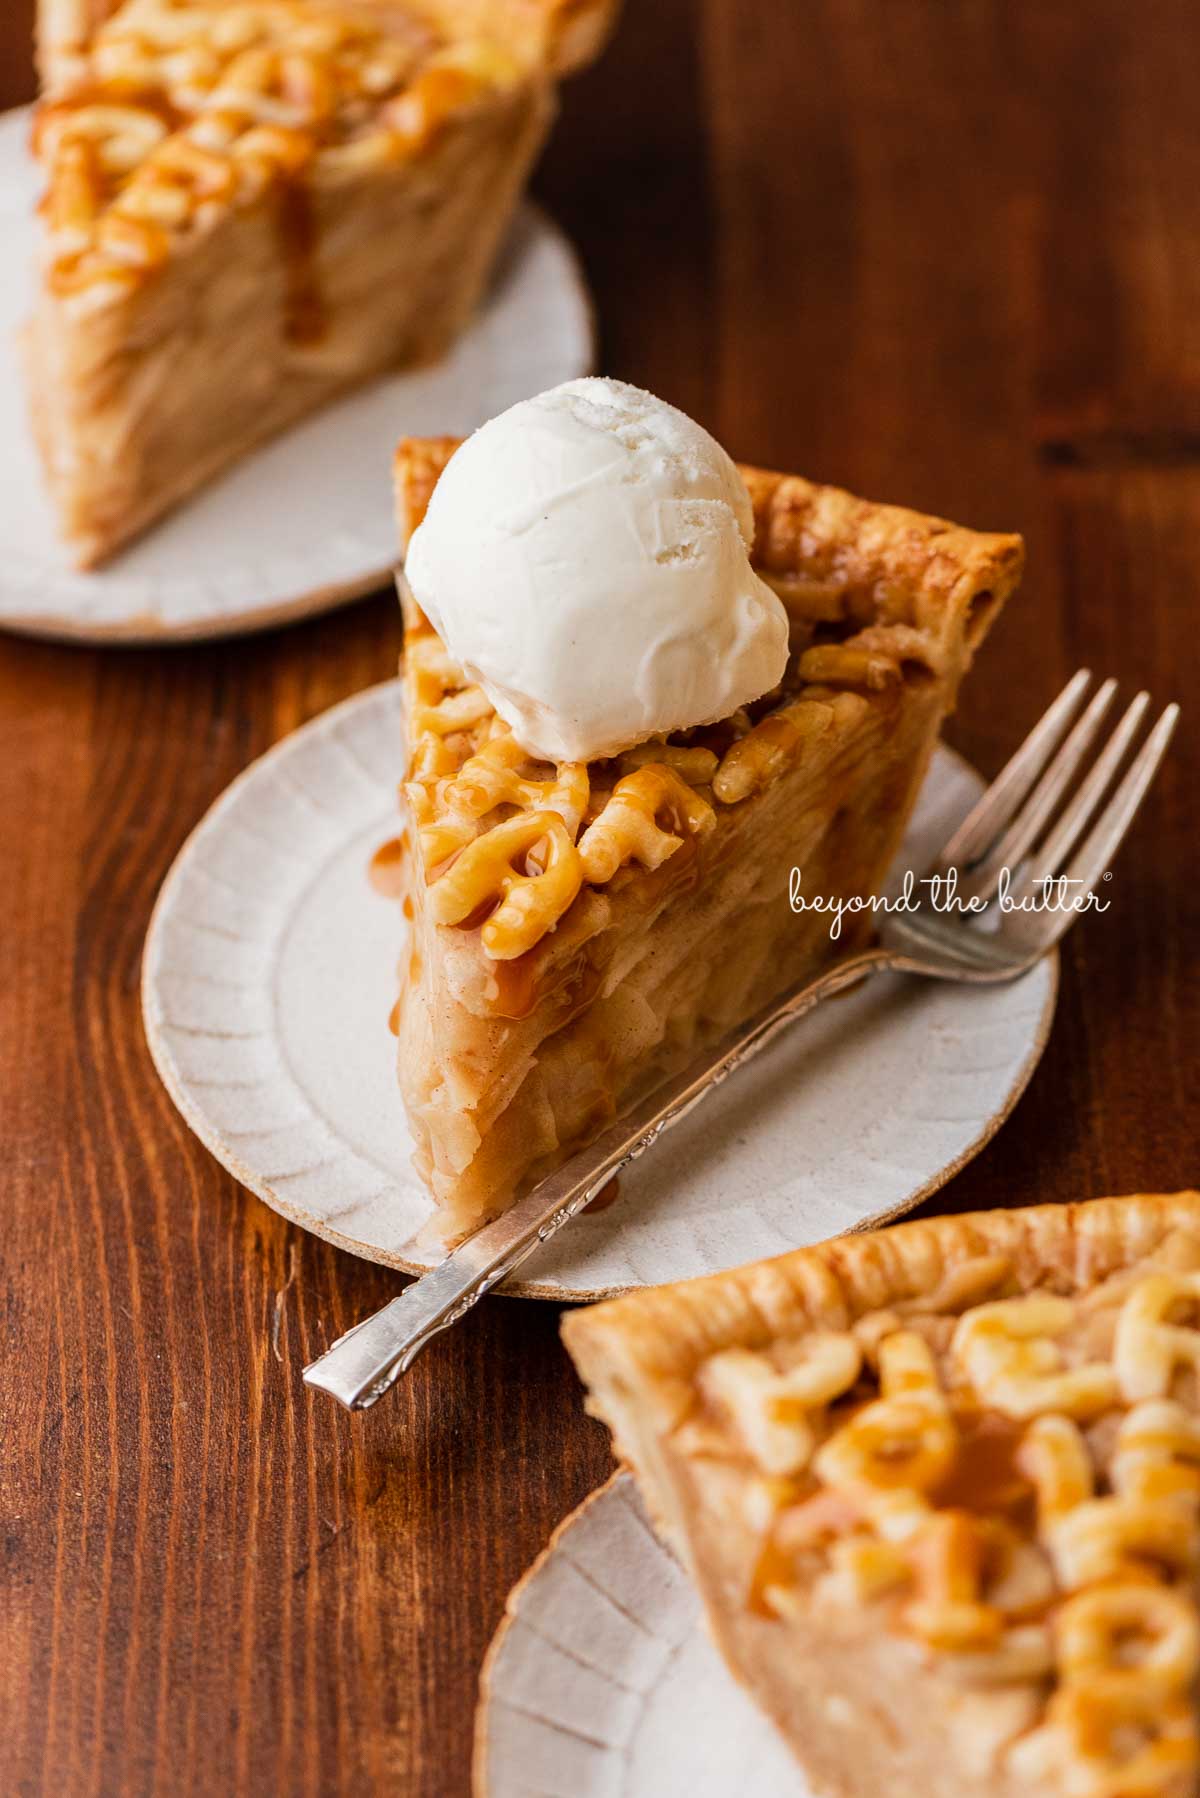 Slices of homemade apple pie drizzled with caramel and topped with ice cream on dessert plates and dark wood background | © Beyond the Butter®